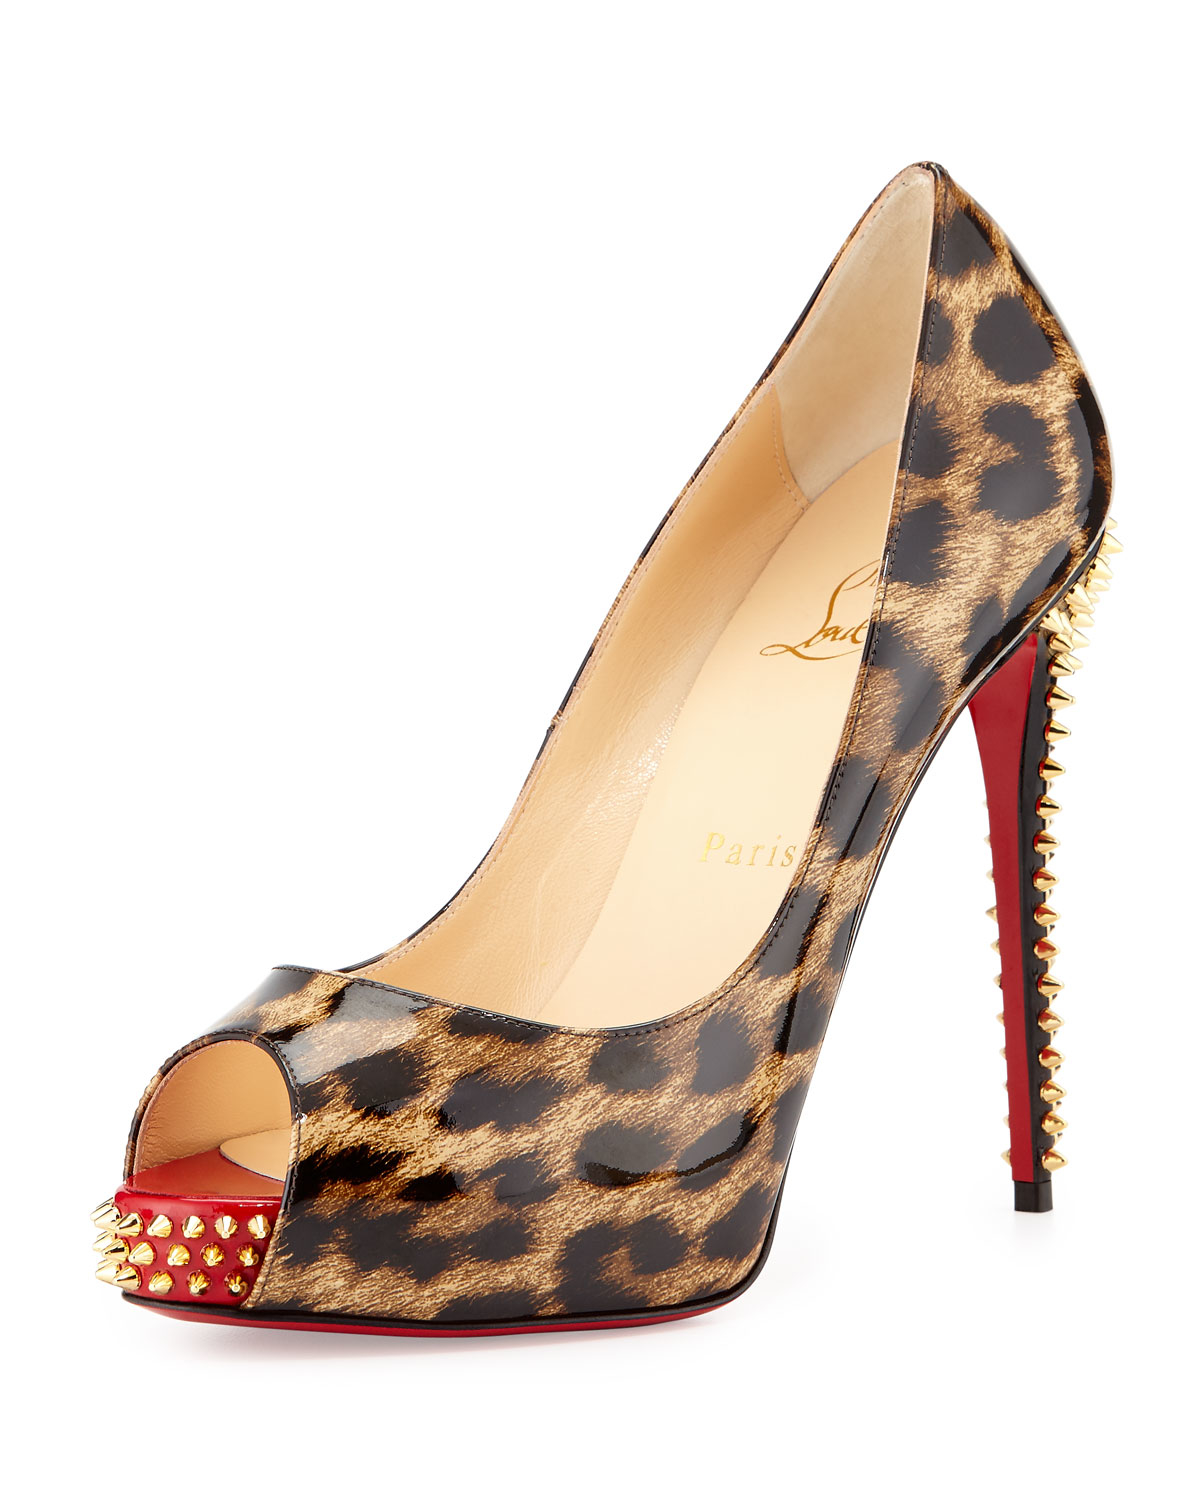 Lyst - Christian Louboutin Nvps Leopard-print Red Sole Pump in Brown